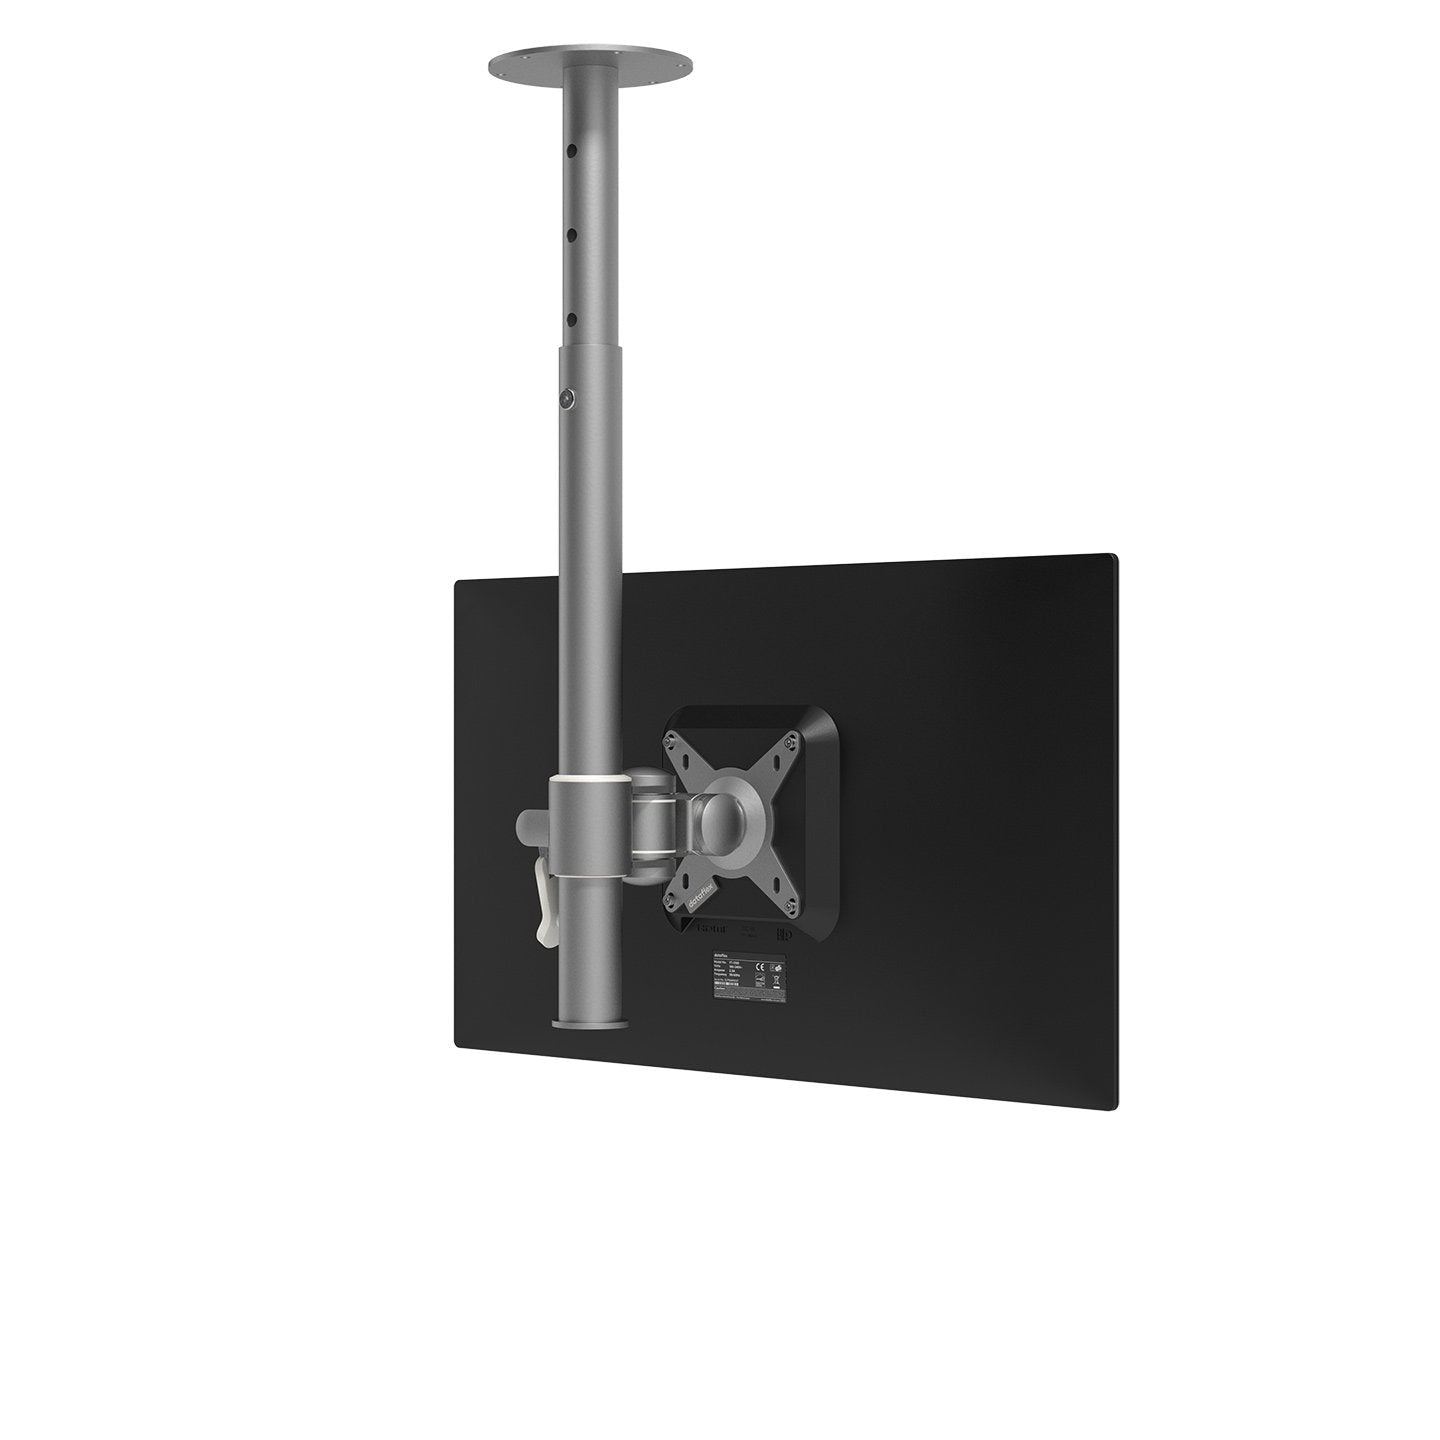 Dataflex Viewmate Monitor Arm Ceiling Mounted 562 Modern